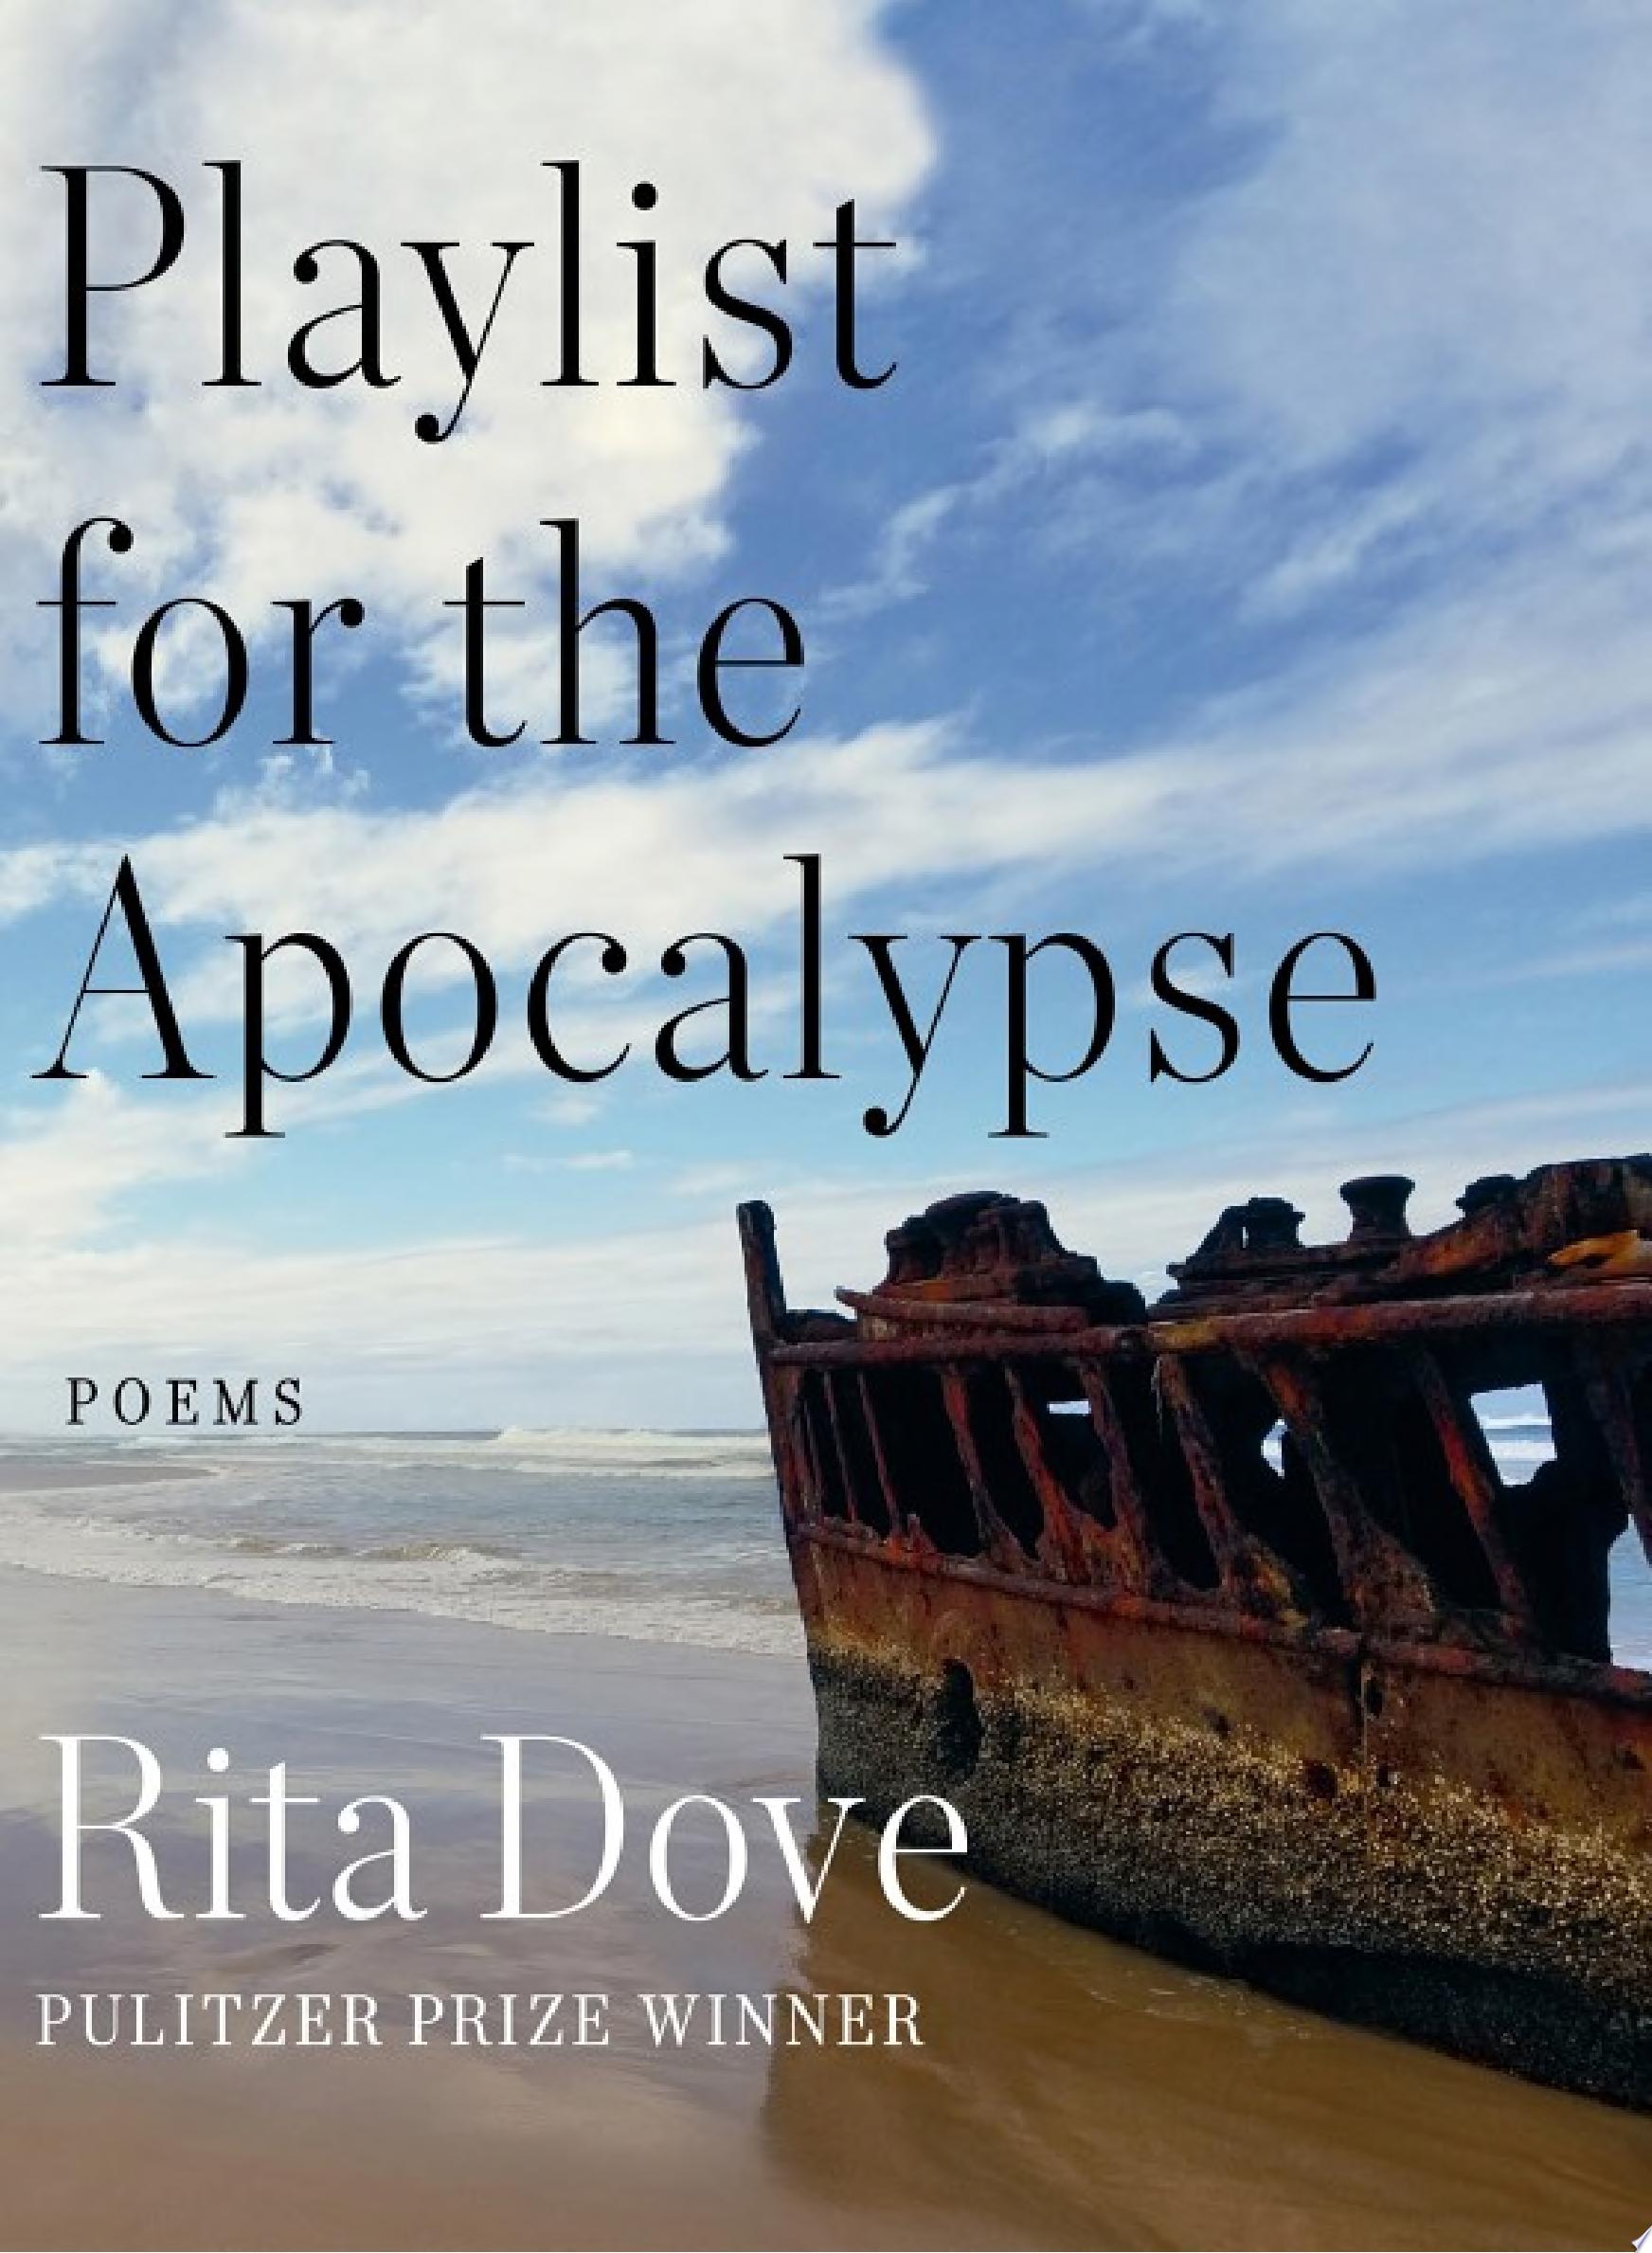 Image for "Playlist for the Apocalypse: Poems"